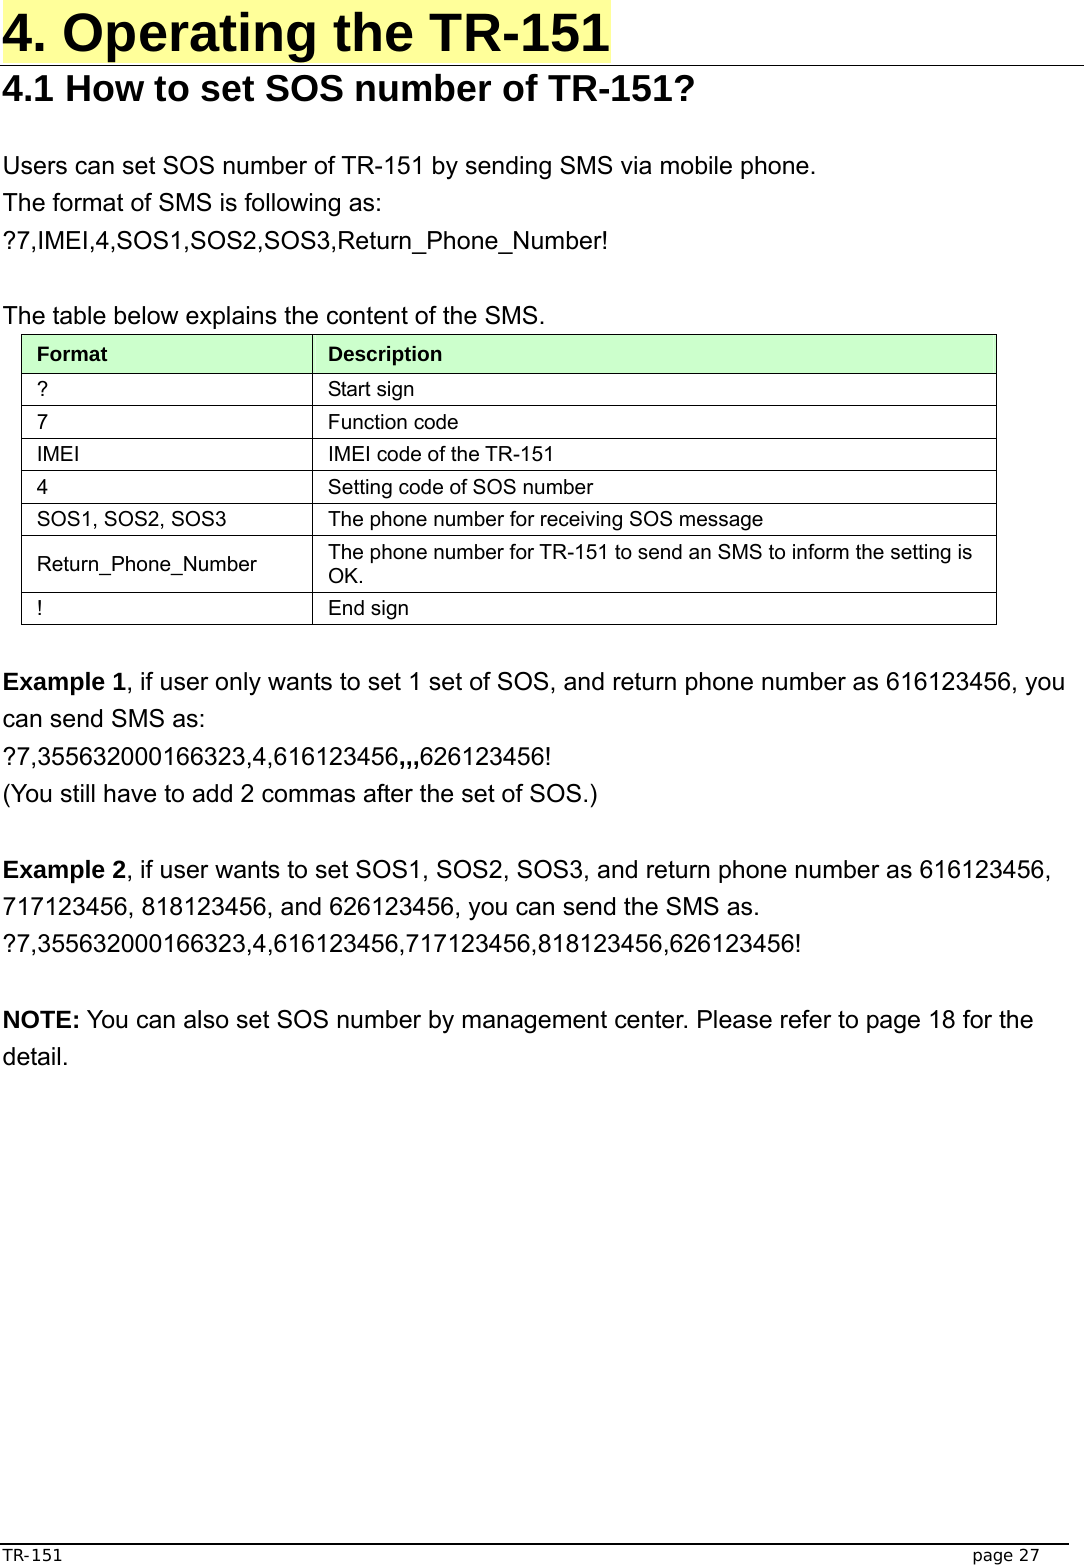  TR-151   page 27 4. Operating the TR-151 4.1 How to set SOS number of TR-151?  Users can set SOS number of TR-151 by sending SMS via mobile phone. The format of SMS is following as: ?7,IMEI,4,SOS1,SOS2,SOS3,Return_Phone_Number!  The table below explains the content of the SMS. Format  Description ? Start sign  7 Function code  IMEI  IMEI code of the TR-151 4  Setting code of SOS number SOS1, SOS2, SOS3  The phone number for receiving SOS message   Return_Phone_Number  The phone number for TR-151 to send an SMS to inform the setting is OK.  ! End sign  Example 1, if user only wants to set 1 set of SOS, and return phone number as 616123456, you can send SMS as: ?7,355632000166323,4,616123456,,,626123456! (You still have to add 2 commas after the set of SOS.)  Example 2, if user wants to set SOS1, SOS2, SOS3, and return phone number as 616123456, 717123456, 818123456, and 626123456, you can send the SMS as. ?7,355632000166323,4,616123456,717123456,818123456,626123456!  NOTE: You can also set SOS number by management center. Please refer to page 18 for the detail. 